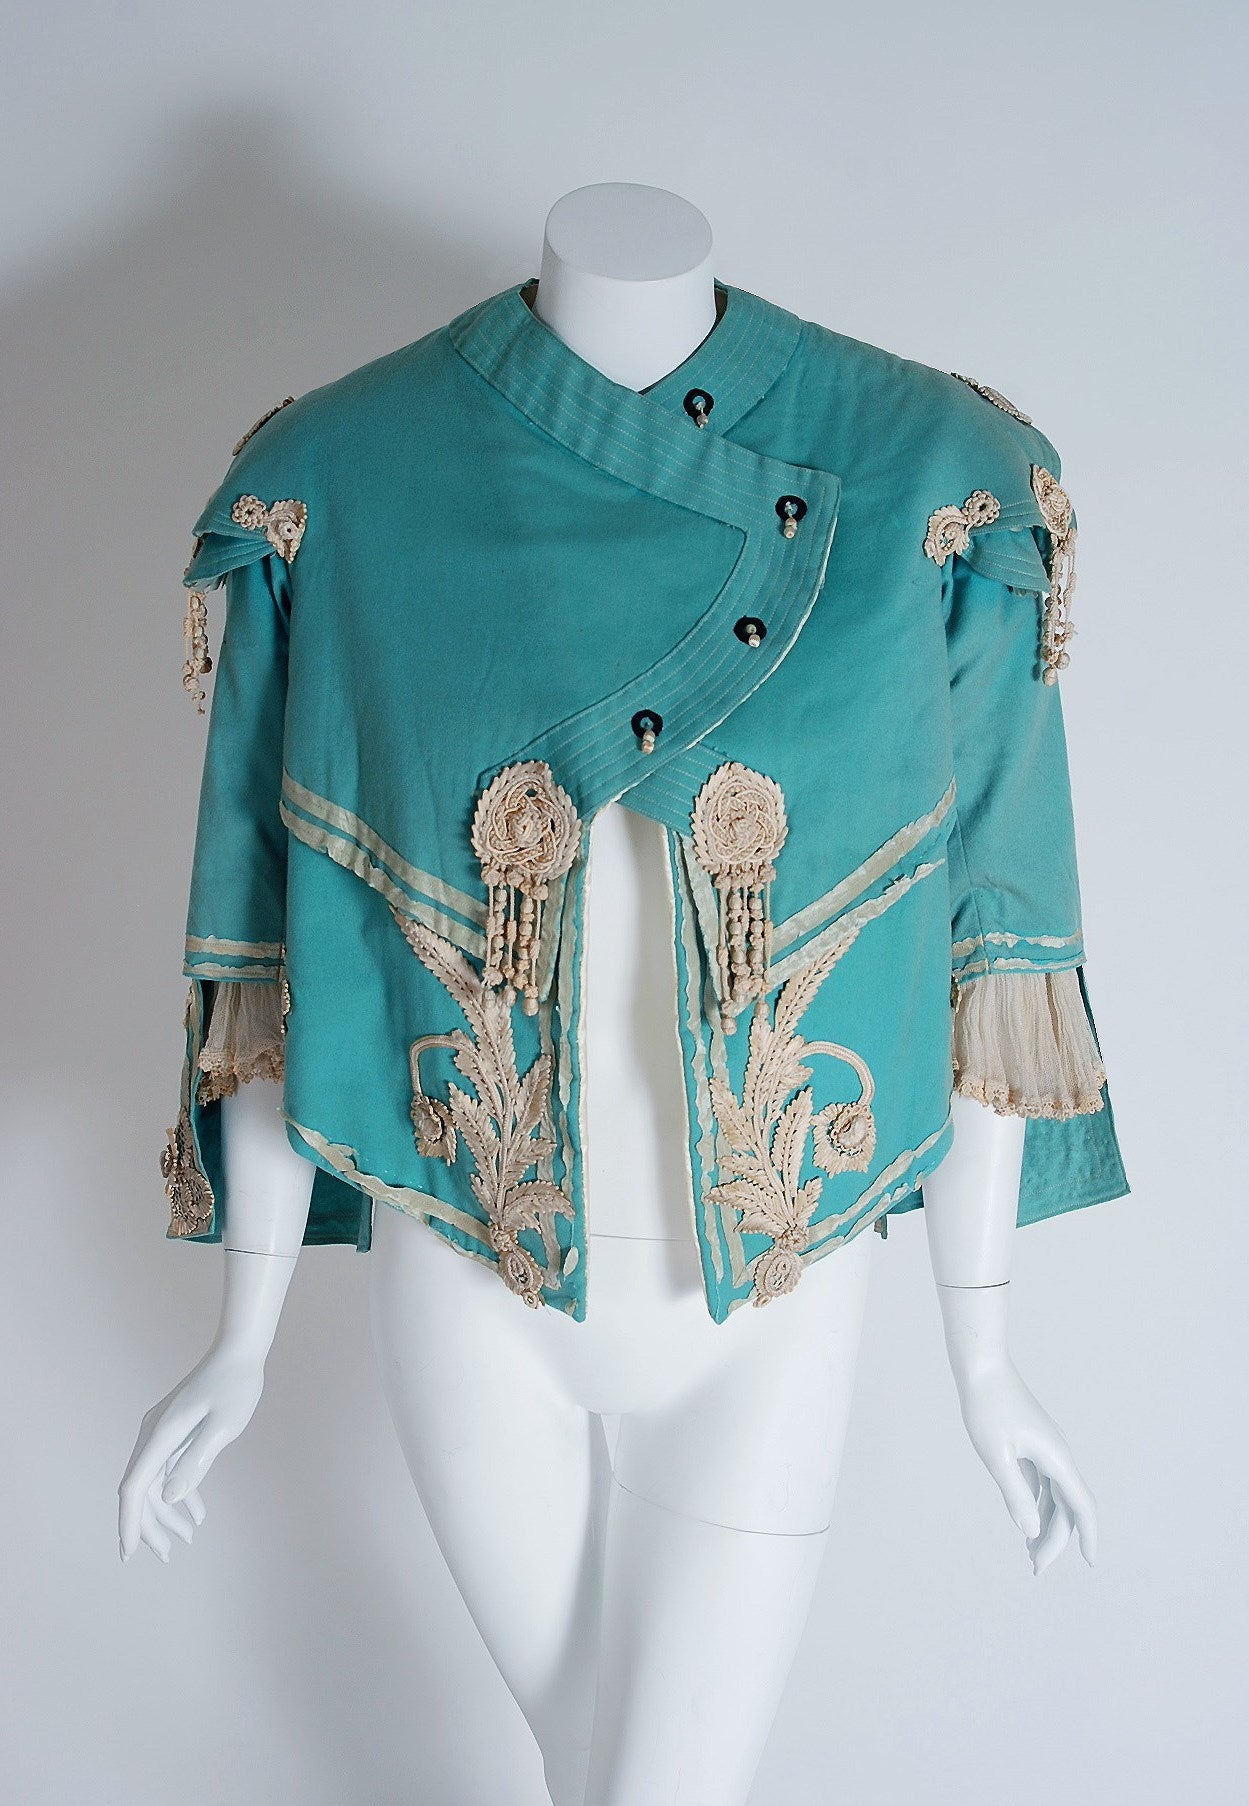 This breathtaking custom-made Victorian cropped jacket dates back to the 1890's. It is lavishly embellished with the finest ivory lace floral motifs and fringe applique. I adore the winged bell-sleeves and asymmetric front closure. The layered